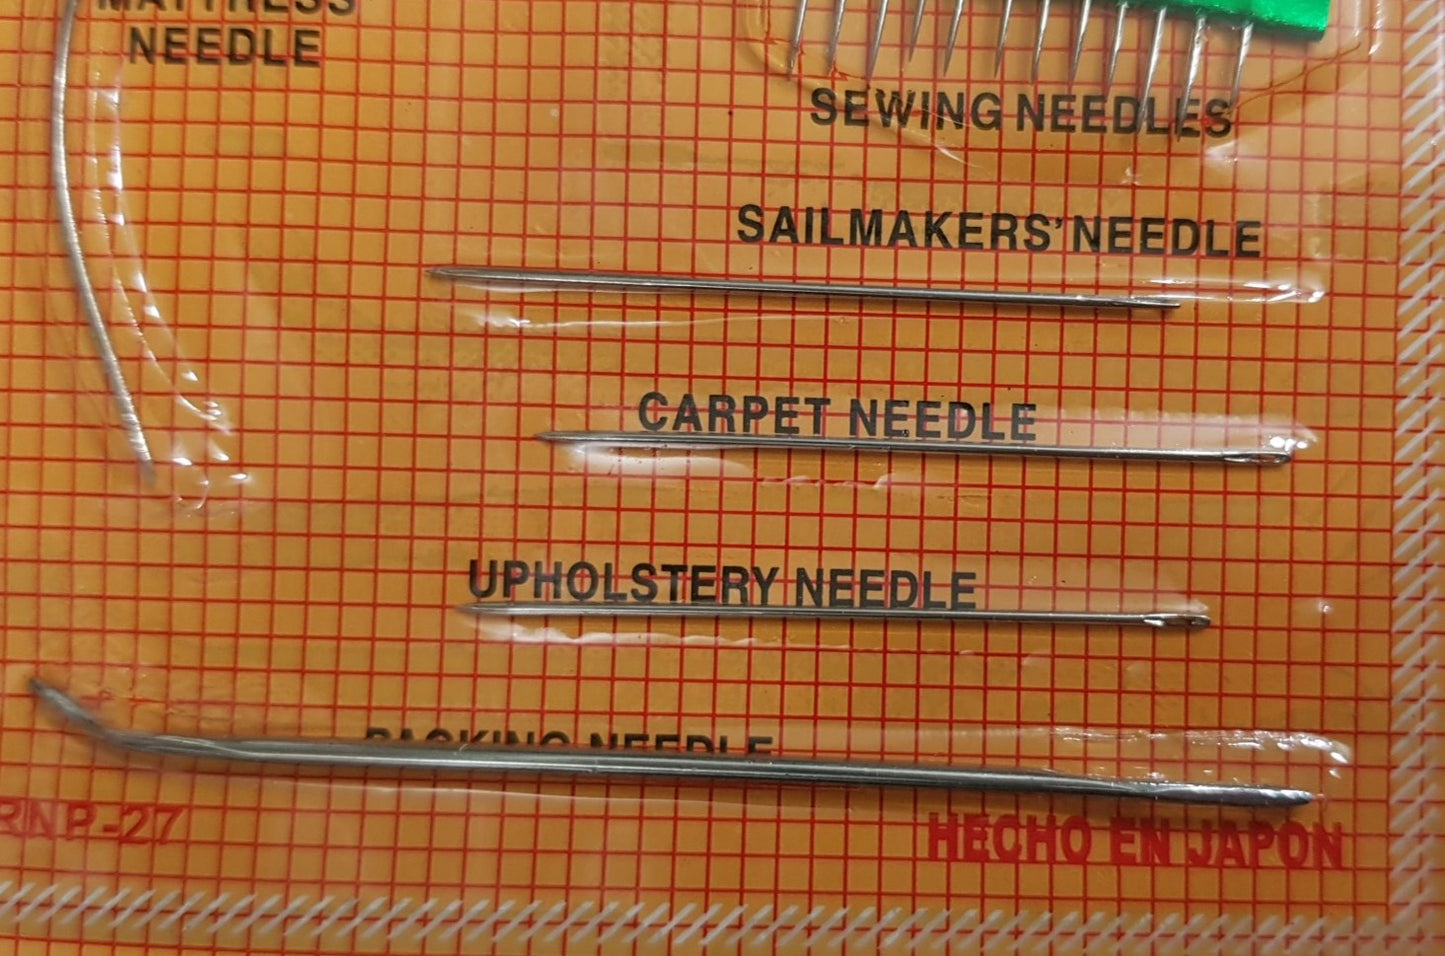 Sewing needle set. With 26 needles and threaders